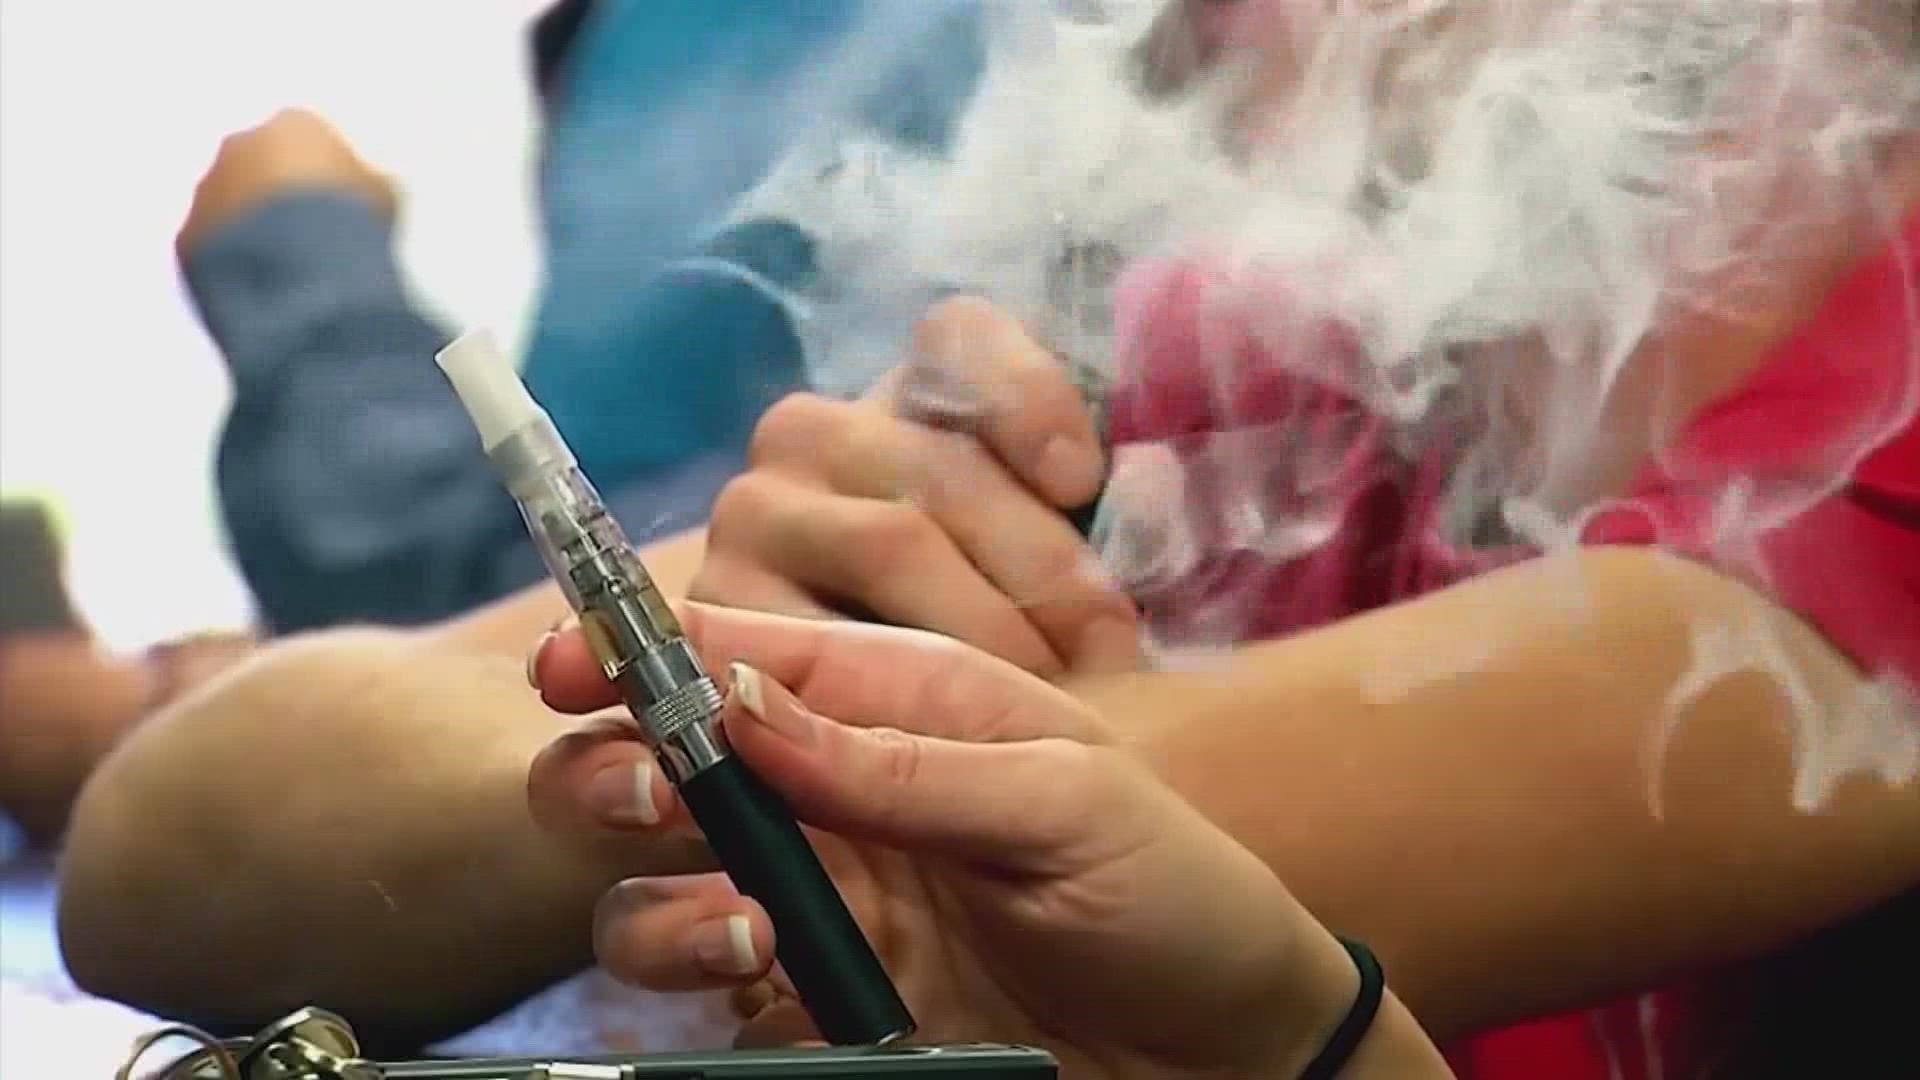 Update E Cig Products To Be Banned From In Some Houston Spaces